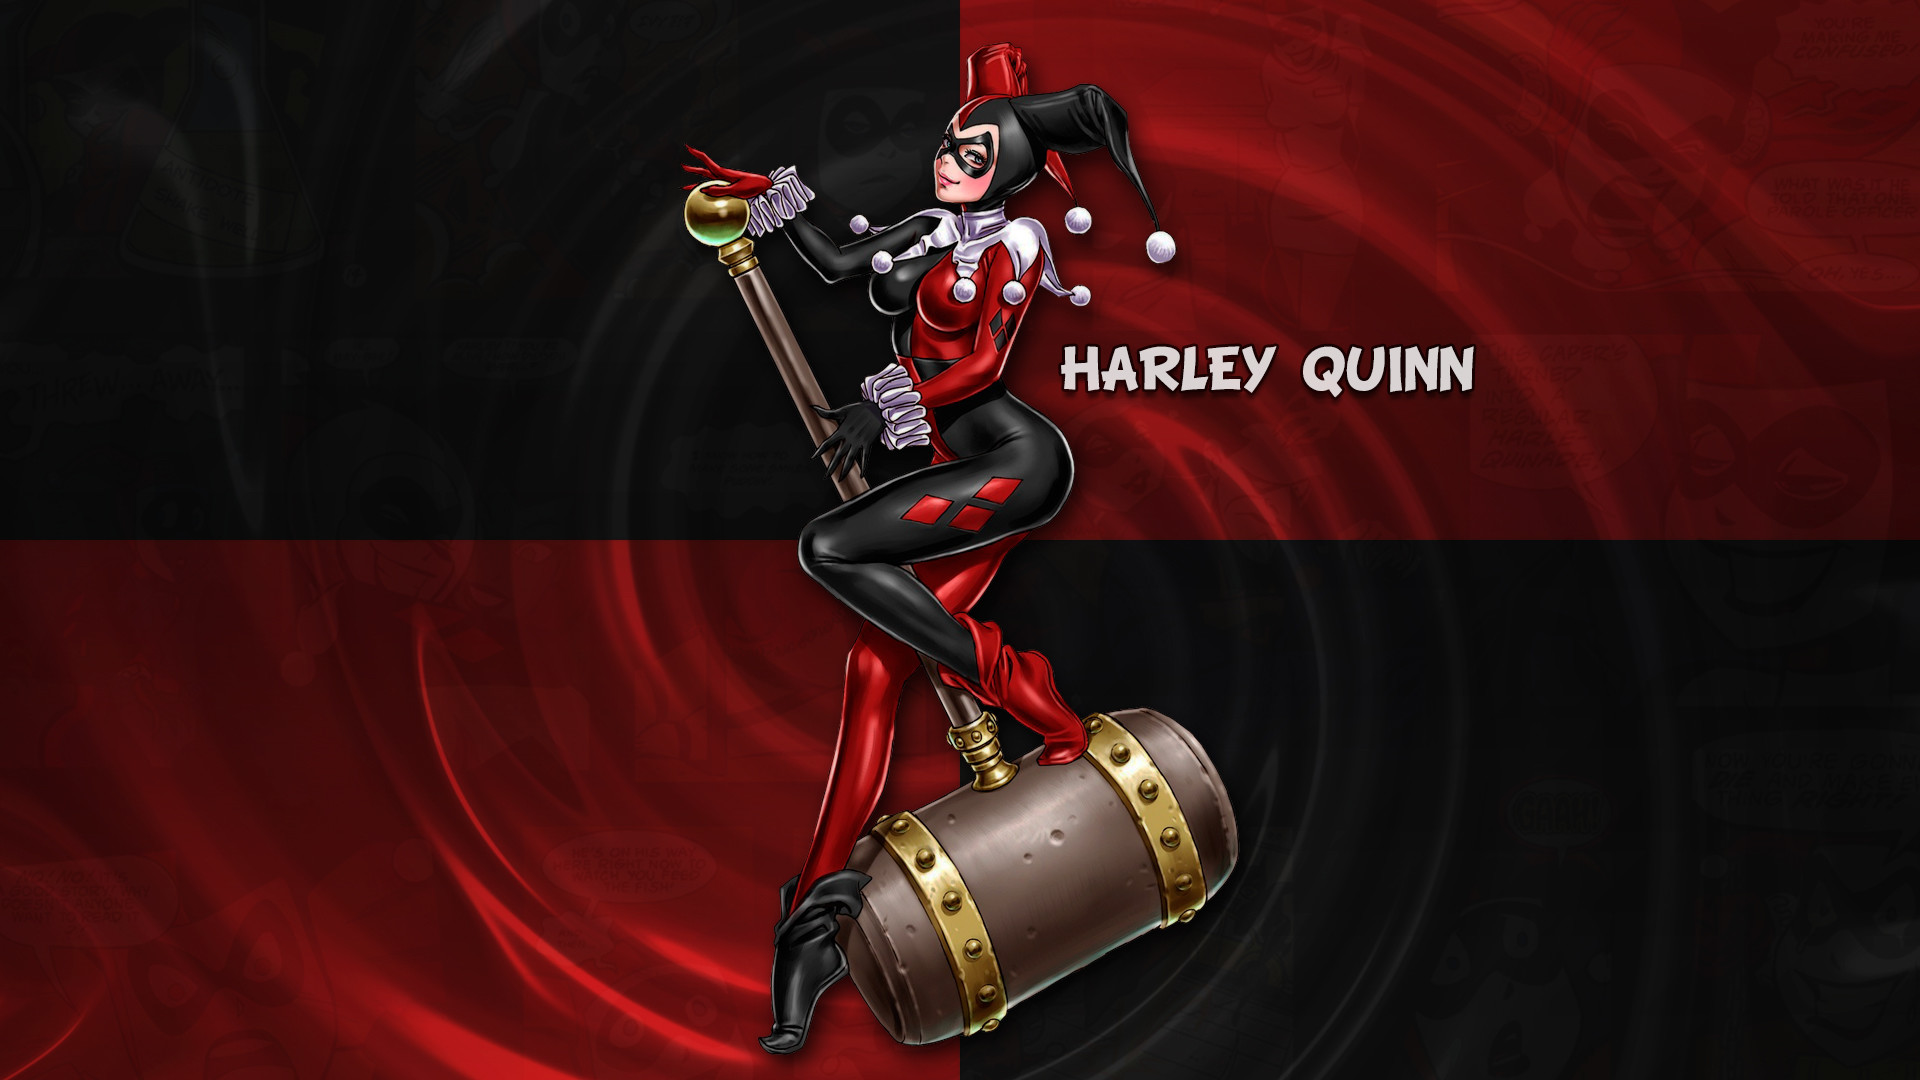 1920x1080 Harley Quinn Wallpaper by solidcell Harley Quinn Wallpaper by solidcell